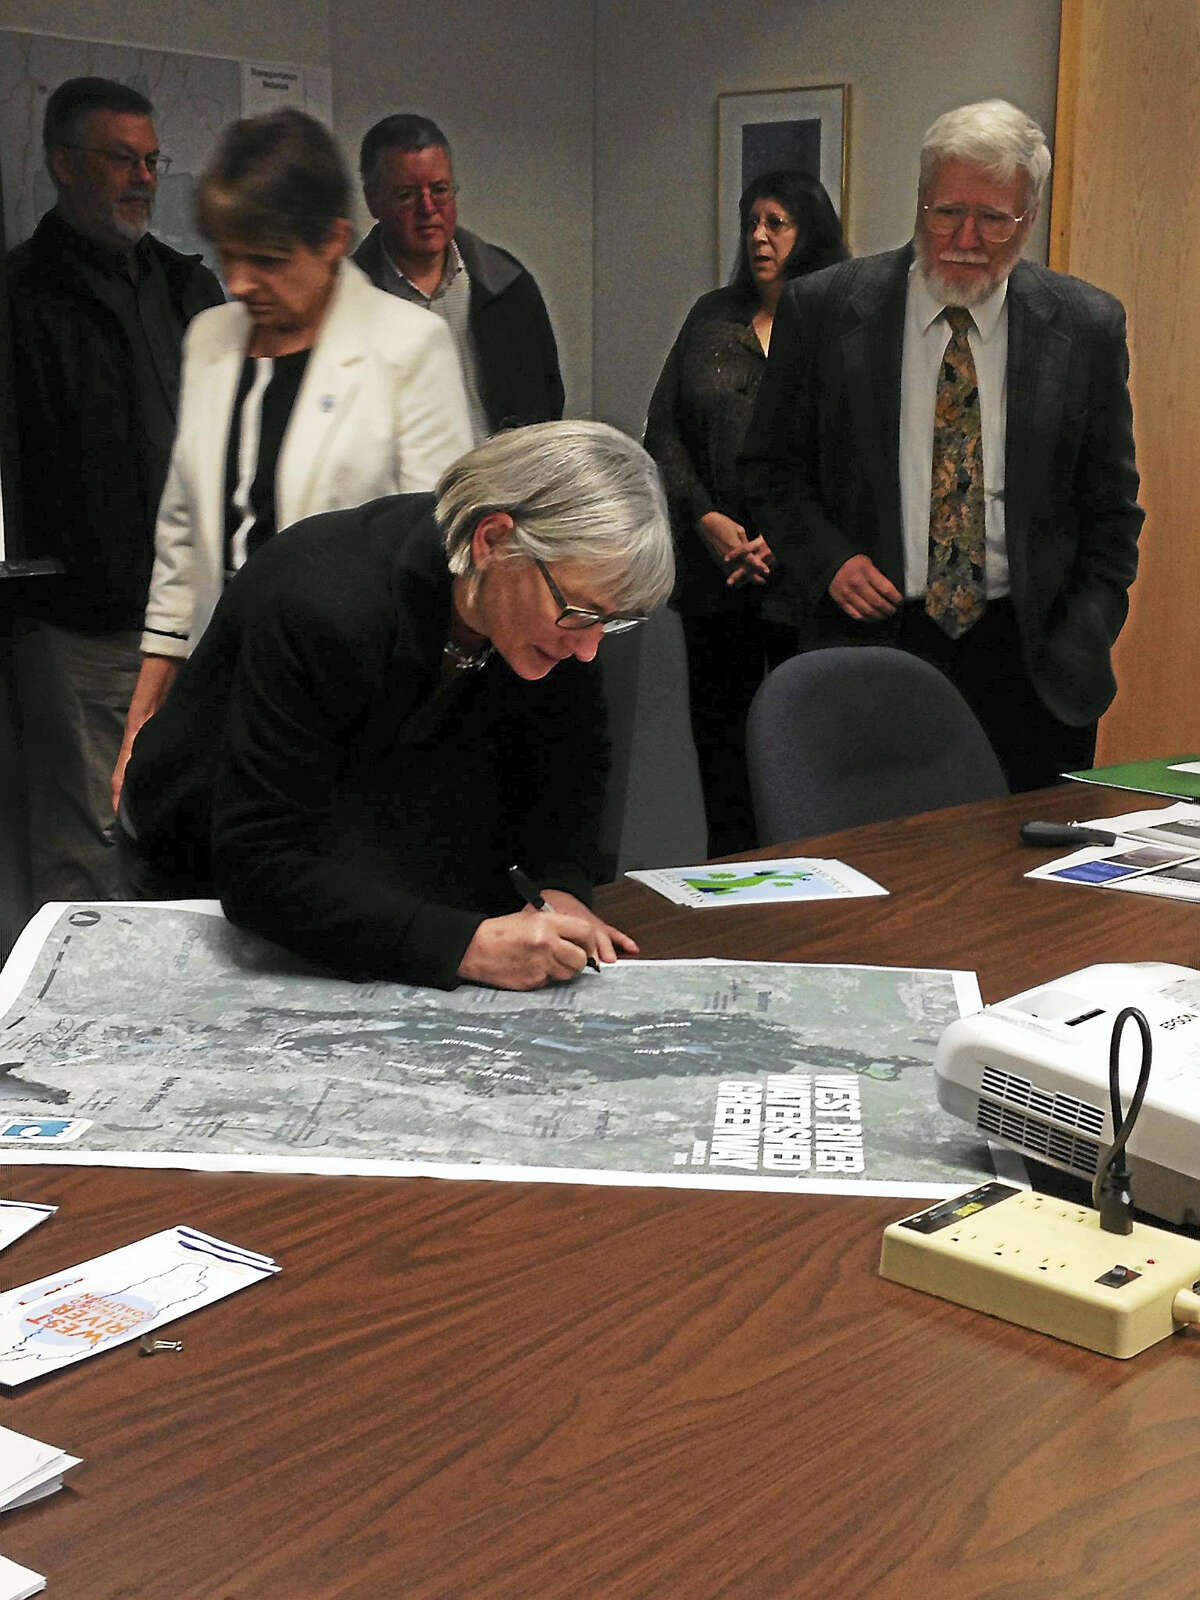 Martha Smith, a member of the steering commitee for the West River Watershed Coalition, signs the map of the newly-designated West River Watershed Greenway.